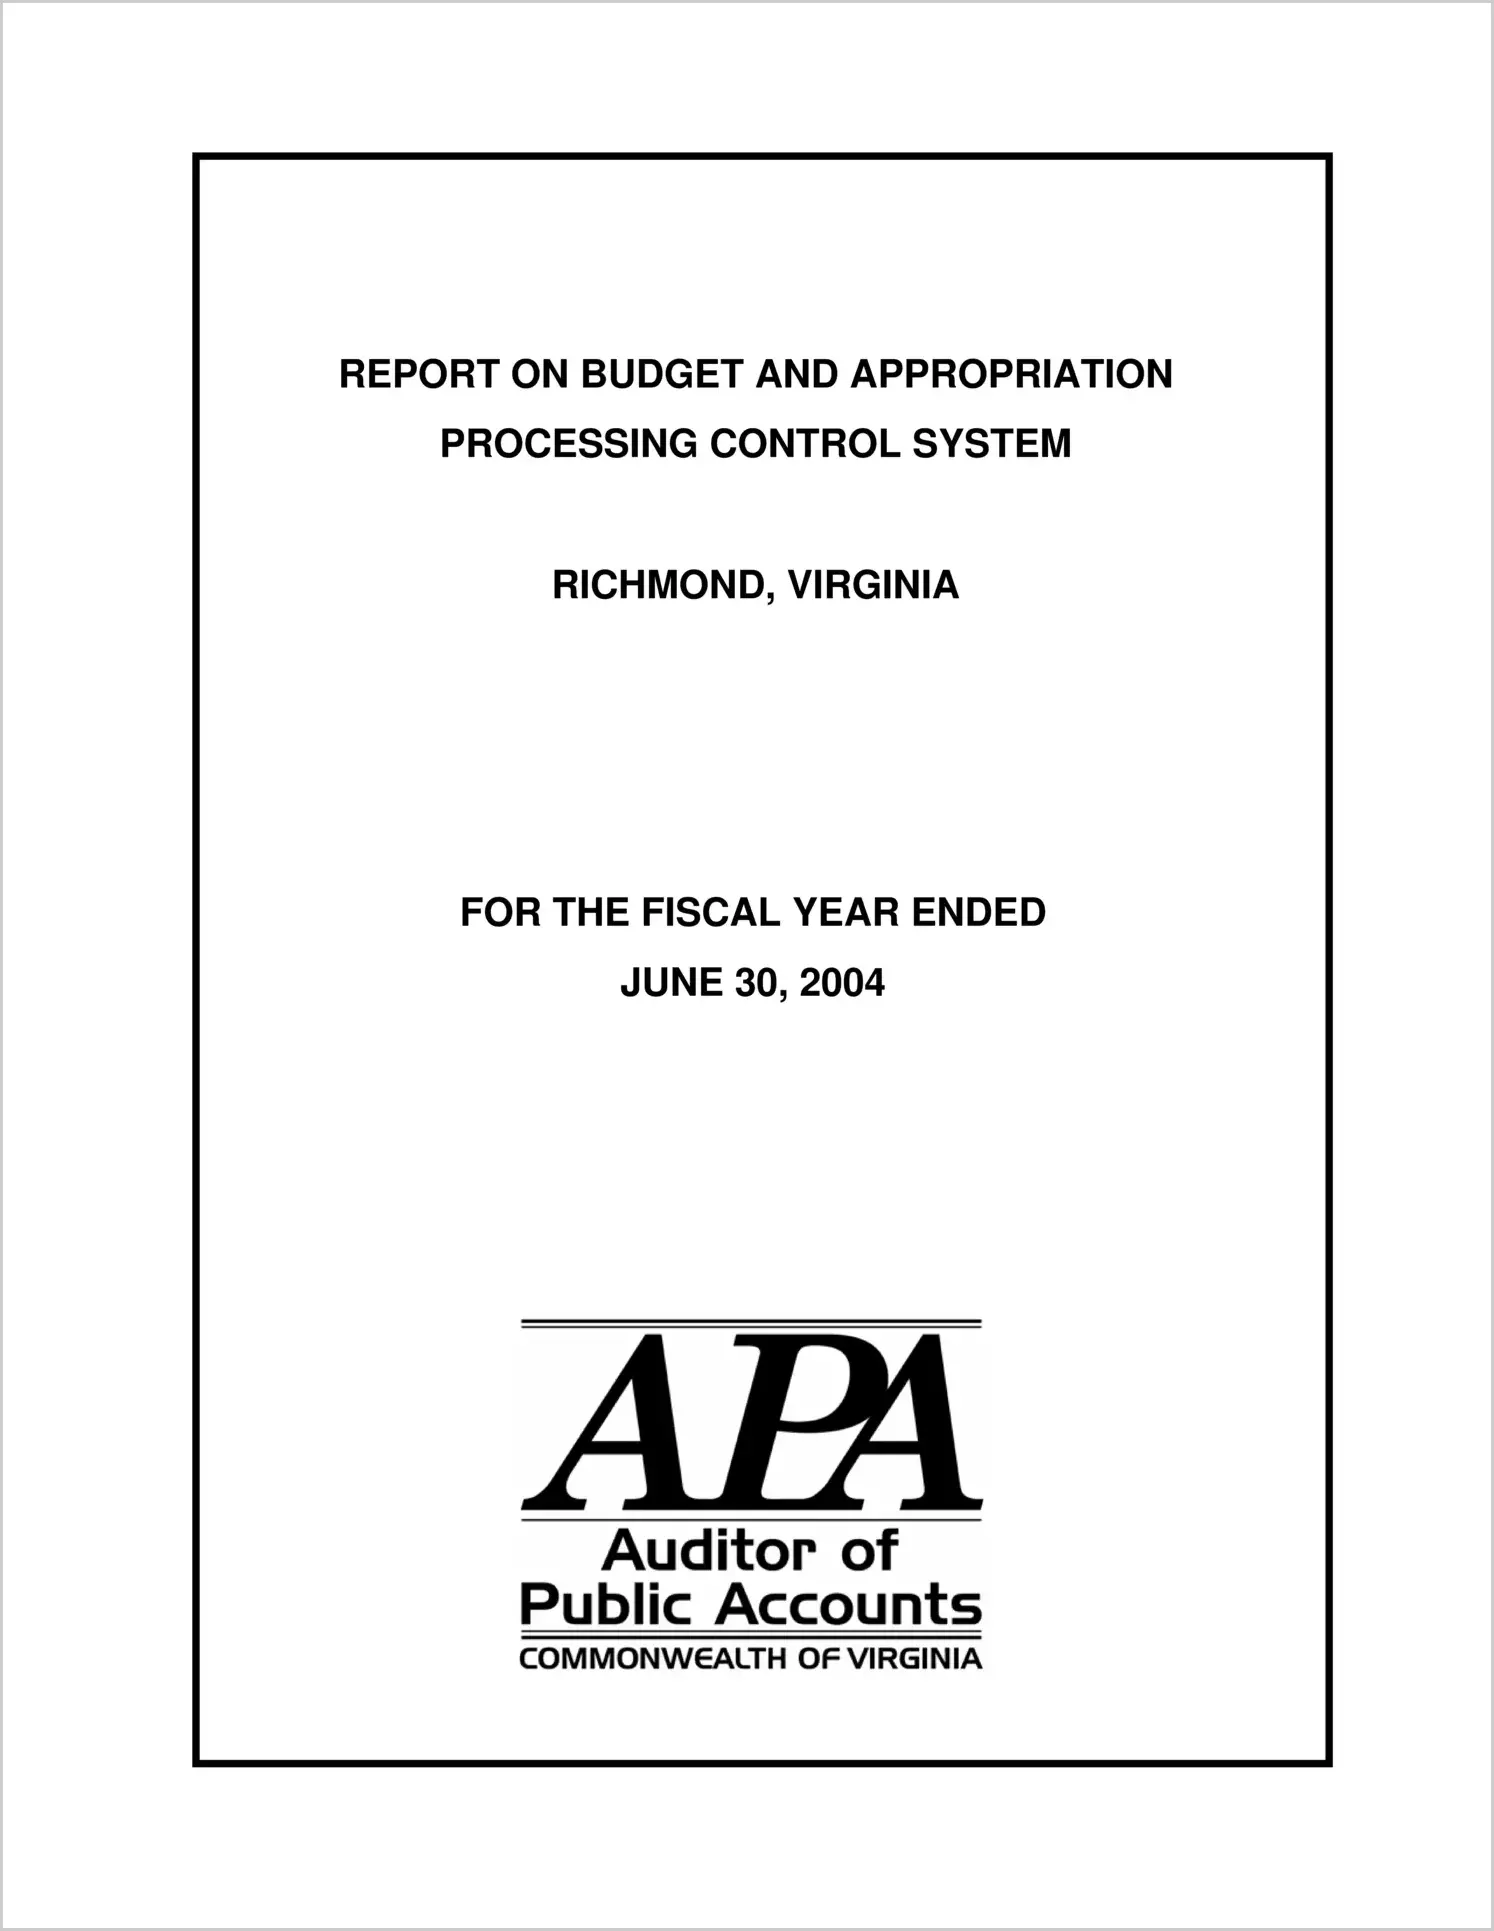 Report on Budget and Appropriation Processing Control System For Fiscal Year Ended June 30, 2004